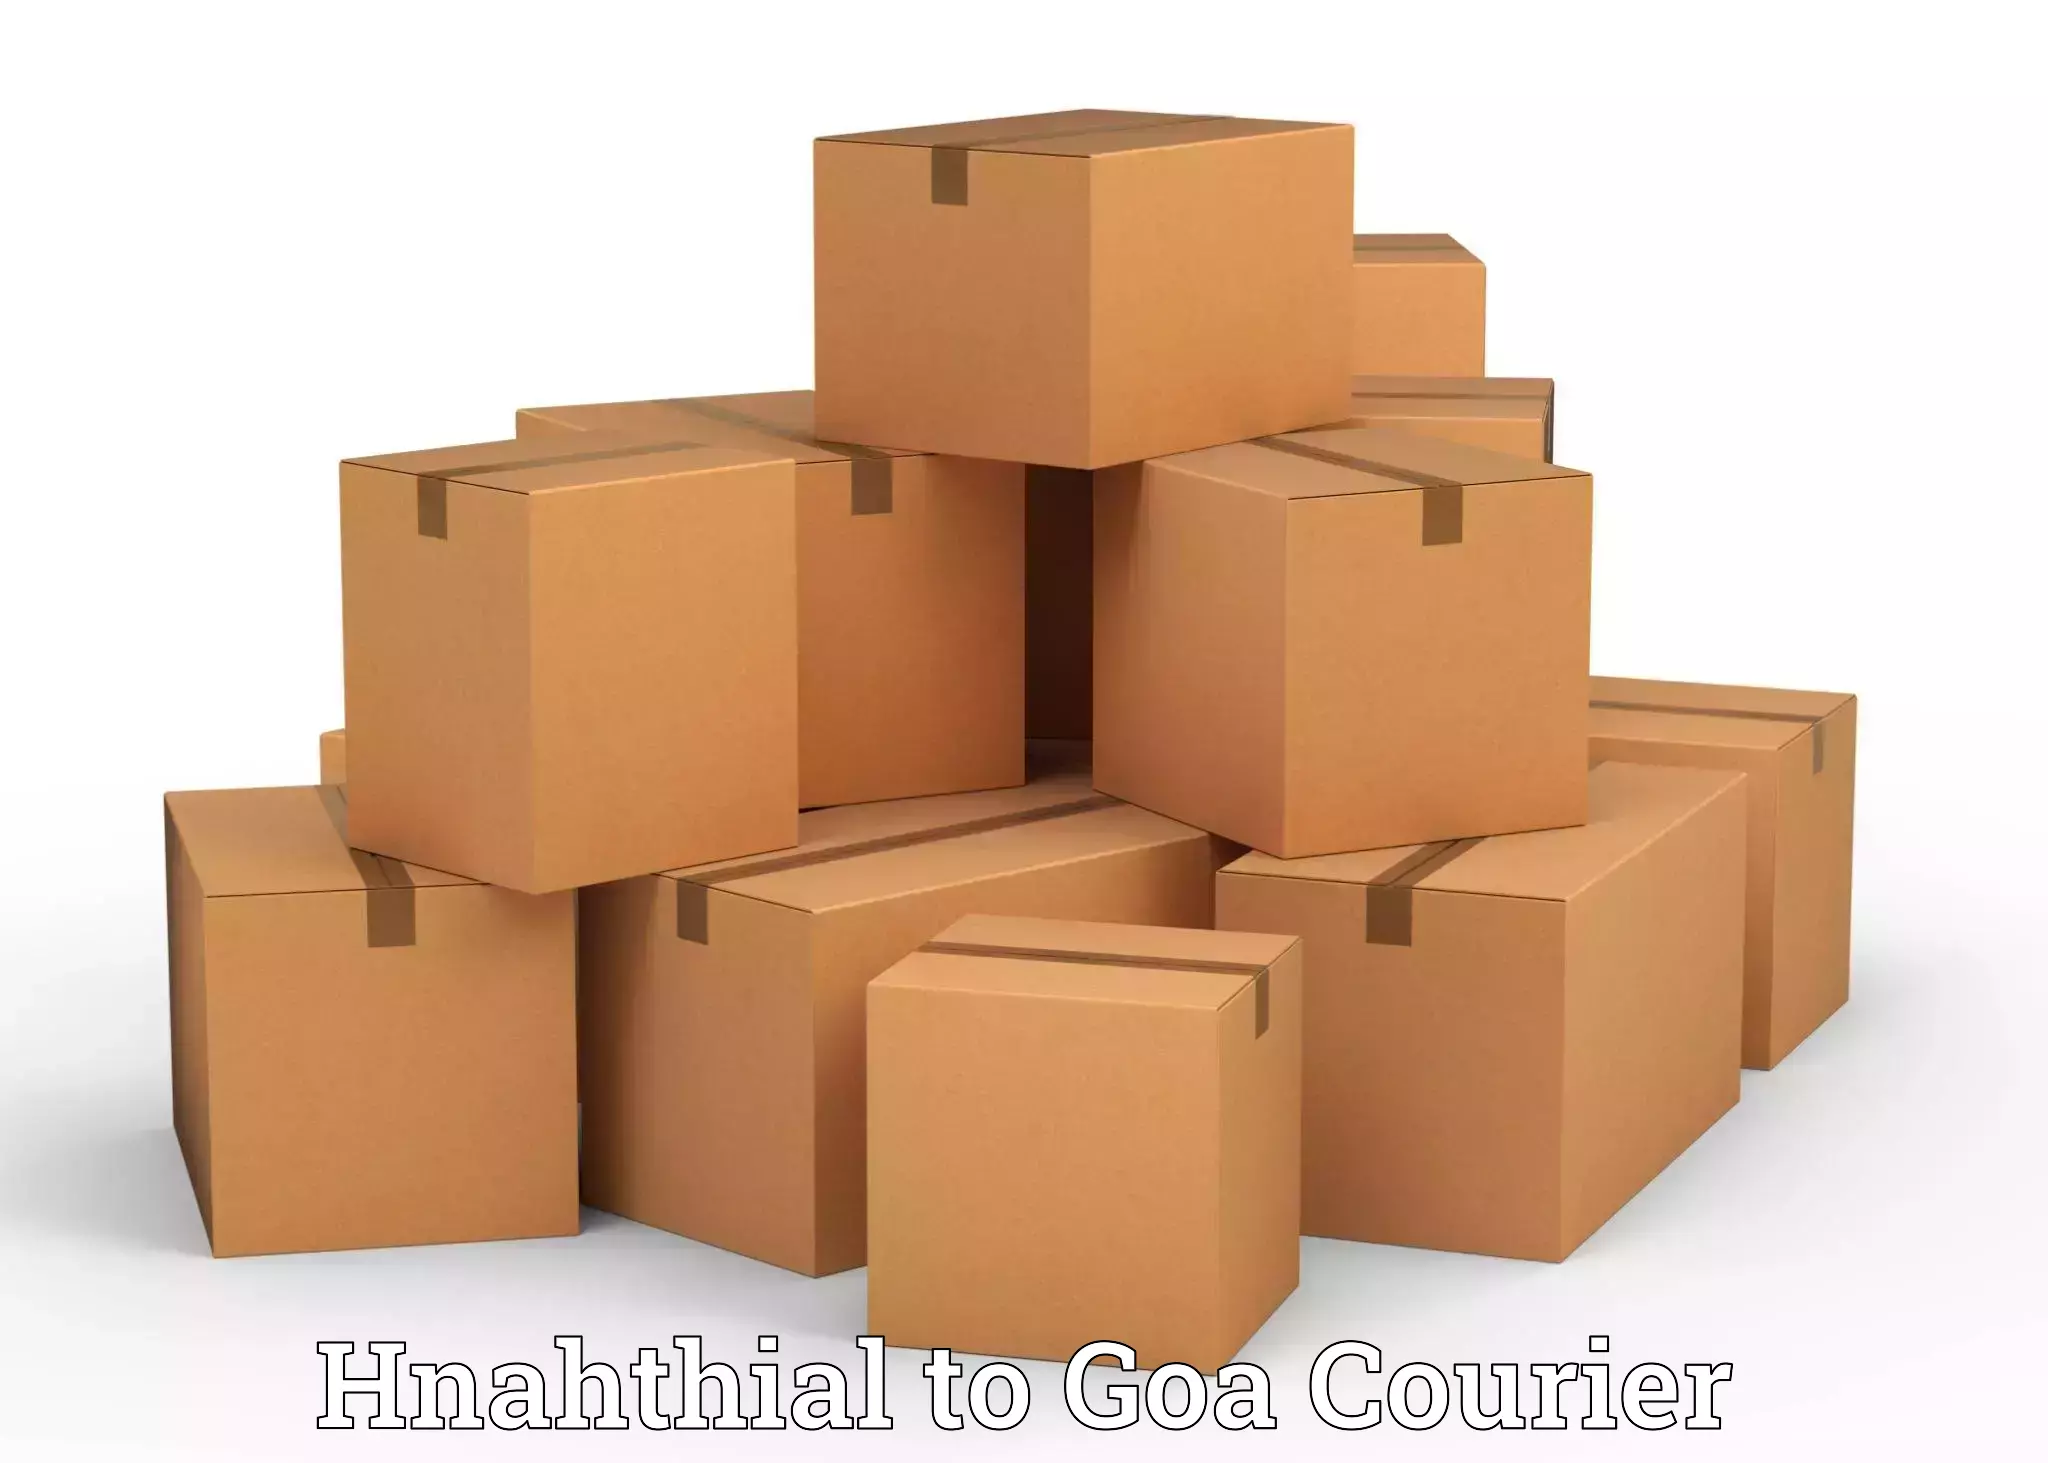 Nationwide furniture transport Hnahthial to Goa